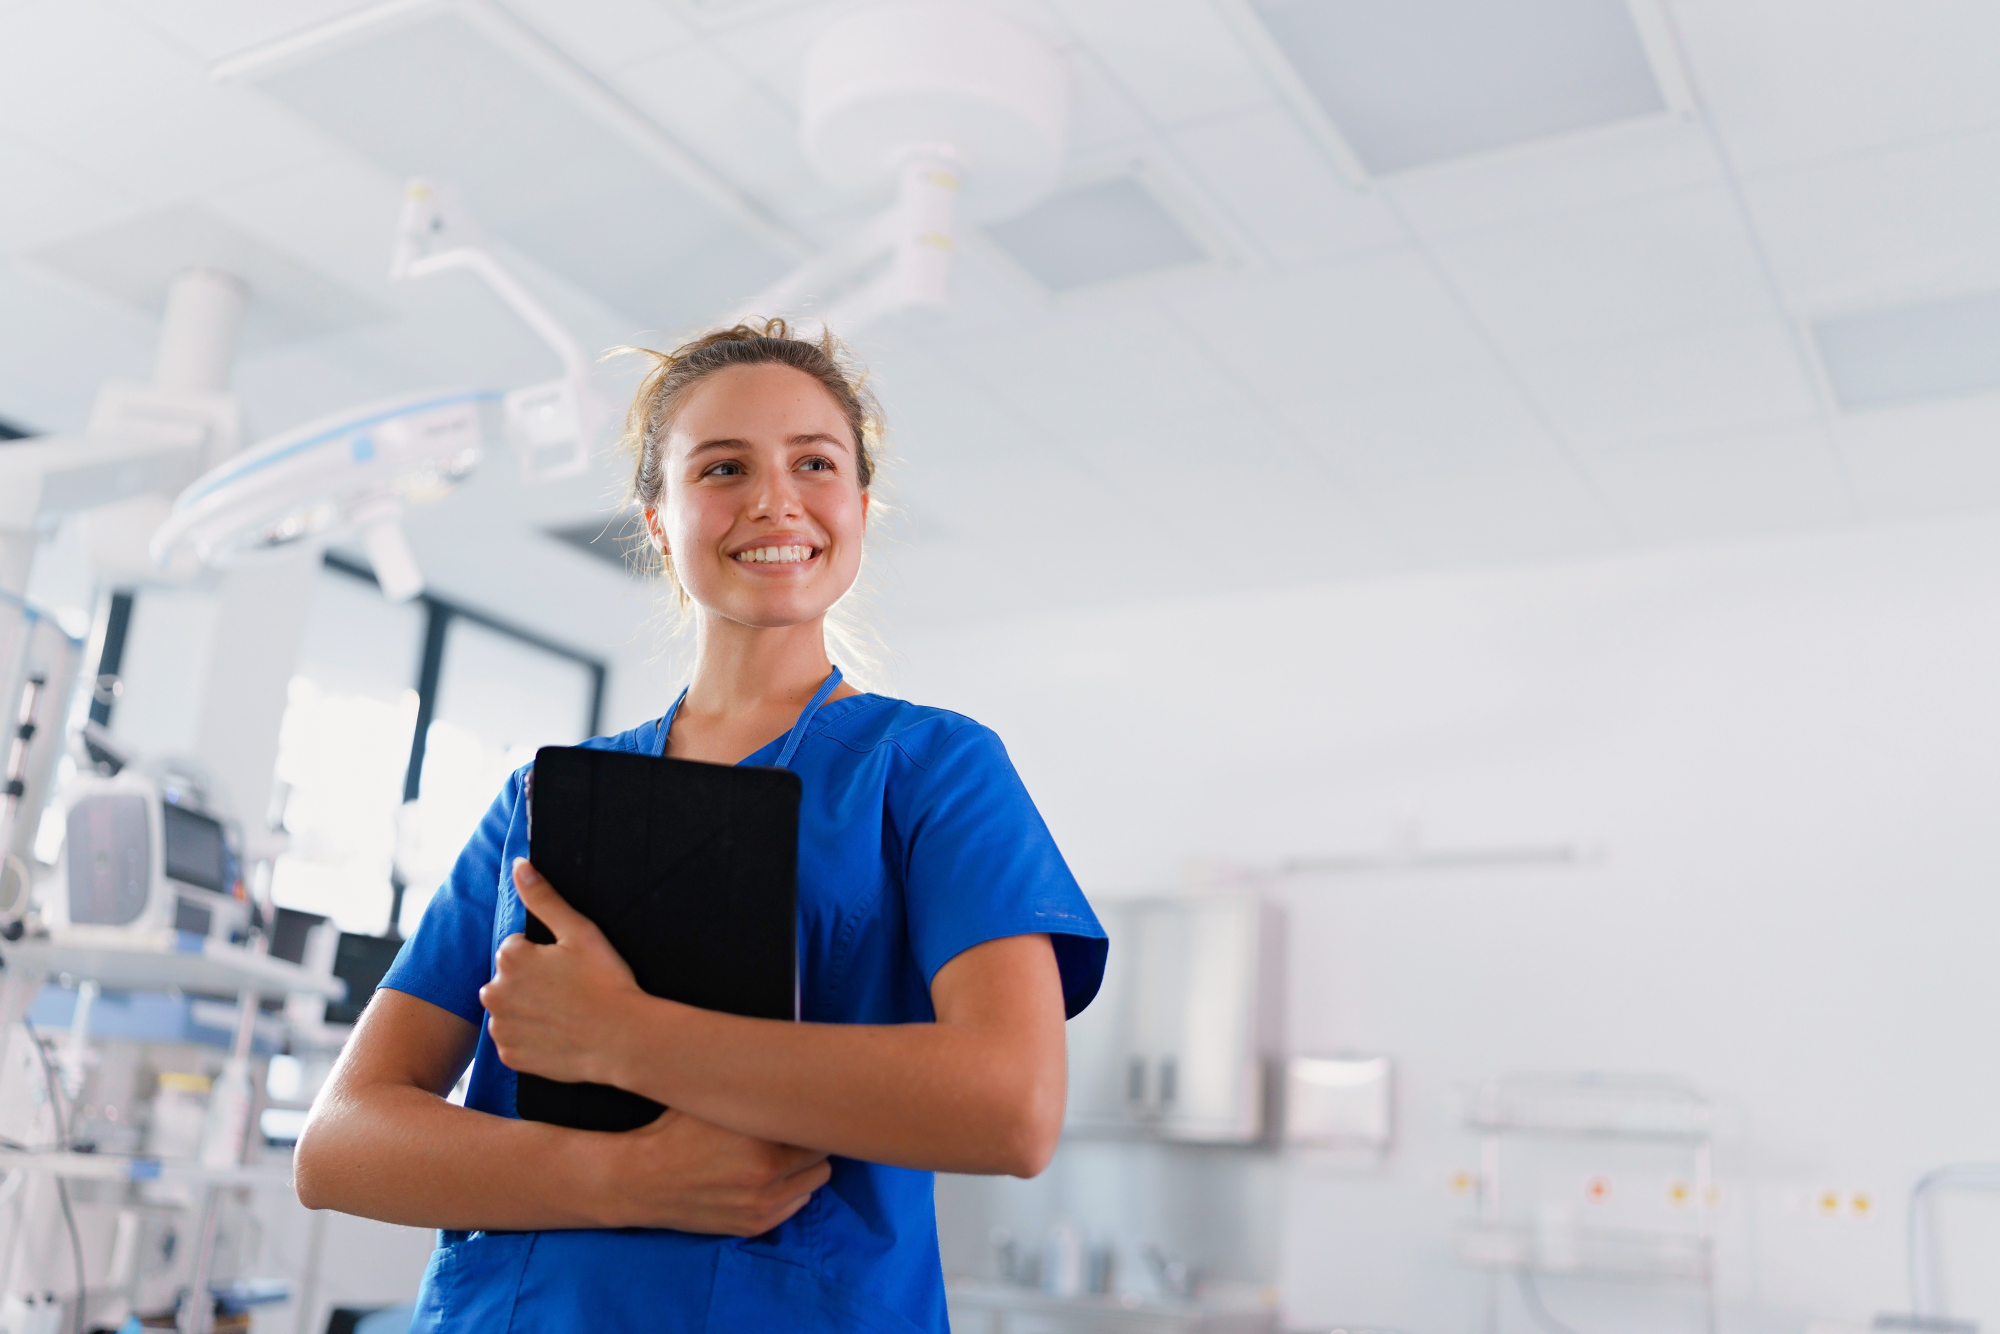 Learn More about Medical Assistant Career Training at Integrity College of Health!